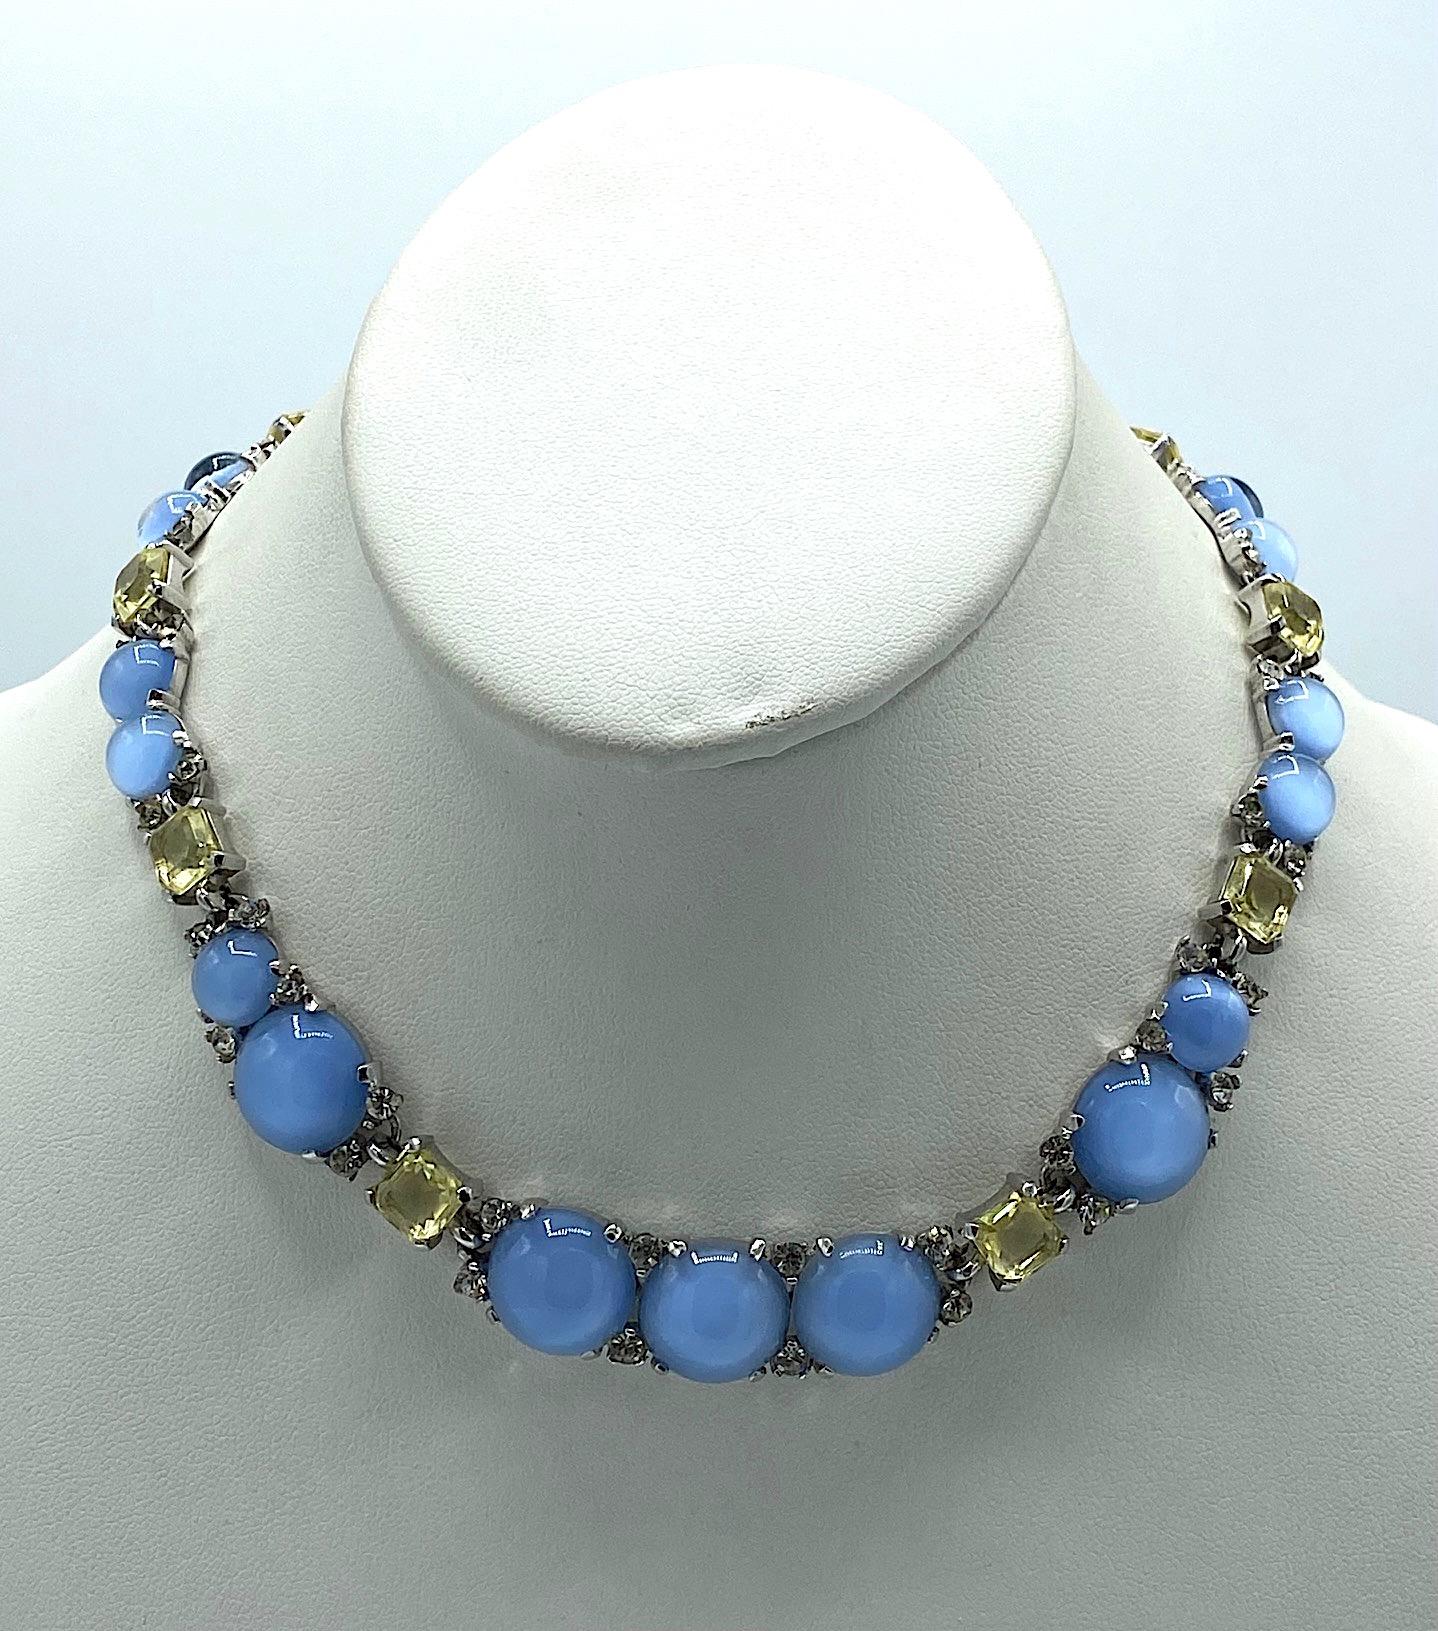 A truly stunning 1950s necklace by famous fashion jewelry company Marcel Boucher. The necklace is meticulously executed in rhodium plate with two sizes of faux glass blue moonstones, fancy yellow crystal emerald cut stones and small accent